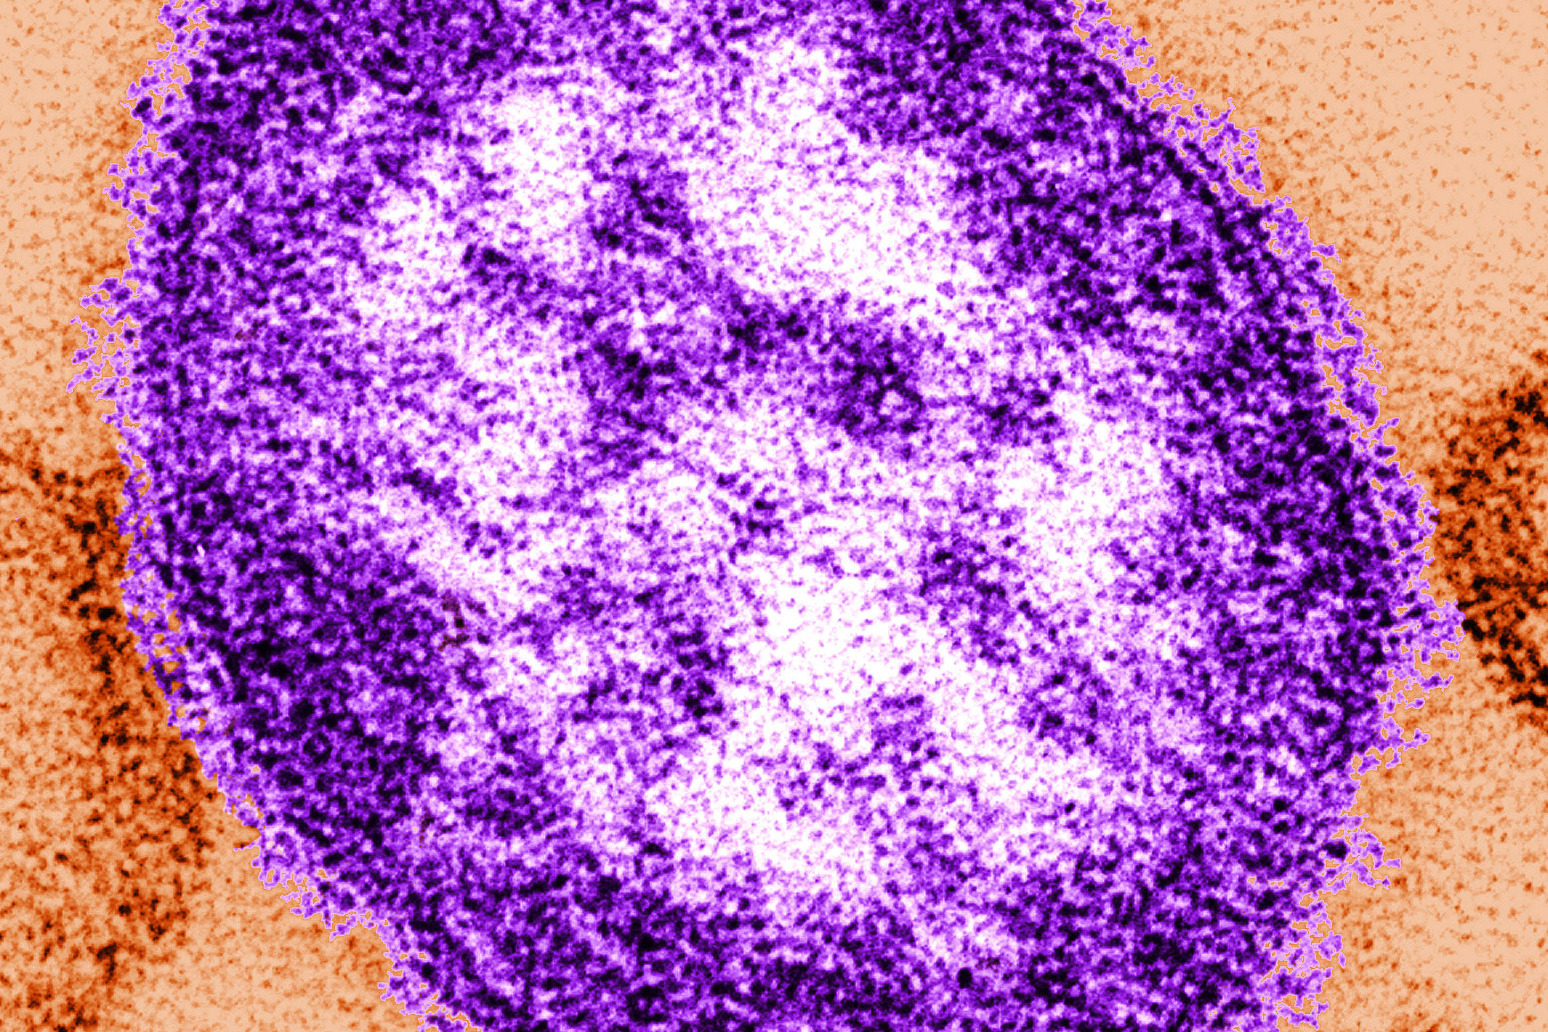 Measles fears after vaccine concerns 